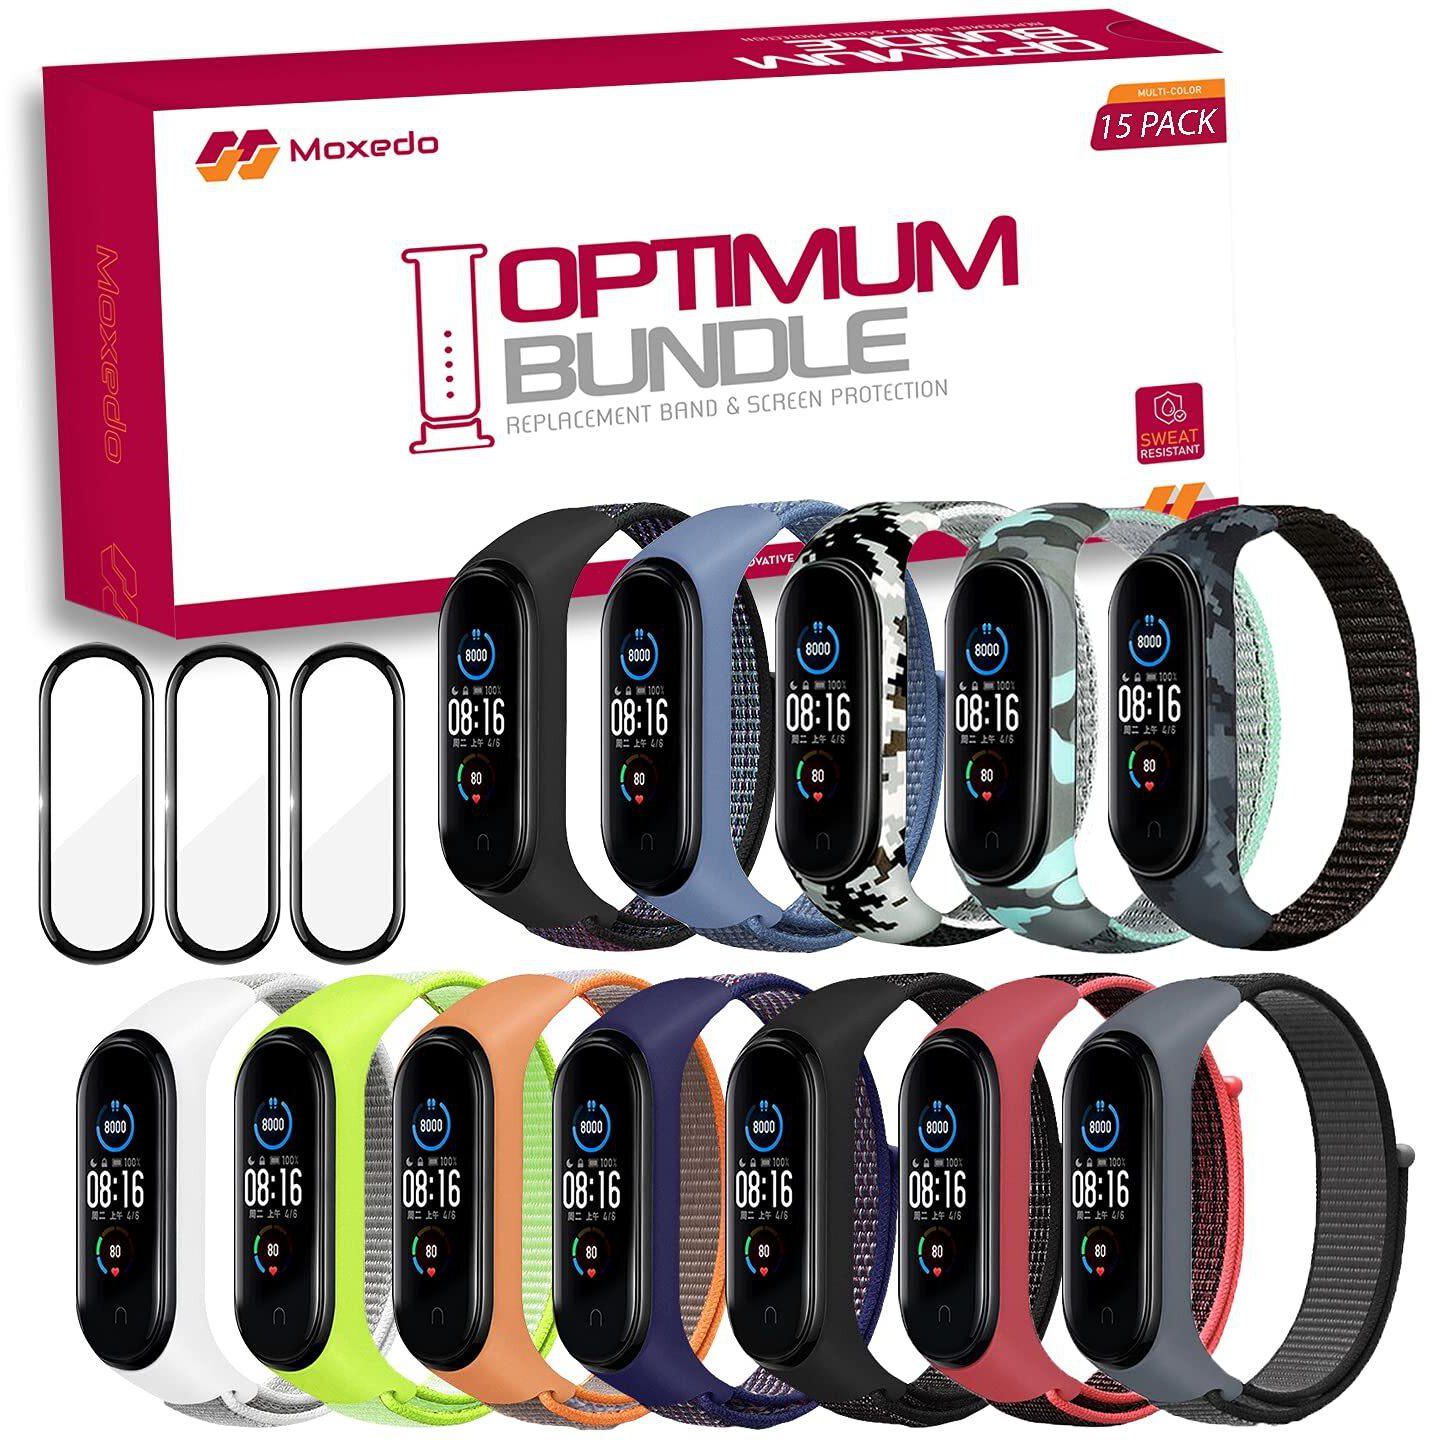 Moxedo Optimum Bundle Pack of 15, Multi-Color Replacement Strap Band Nylon Sports Loop With Screen Protector Compatible for Xiaomi Mi Band 6 / Mi Band 5 (MX-MiBand6Pack-C4)